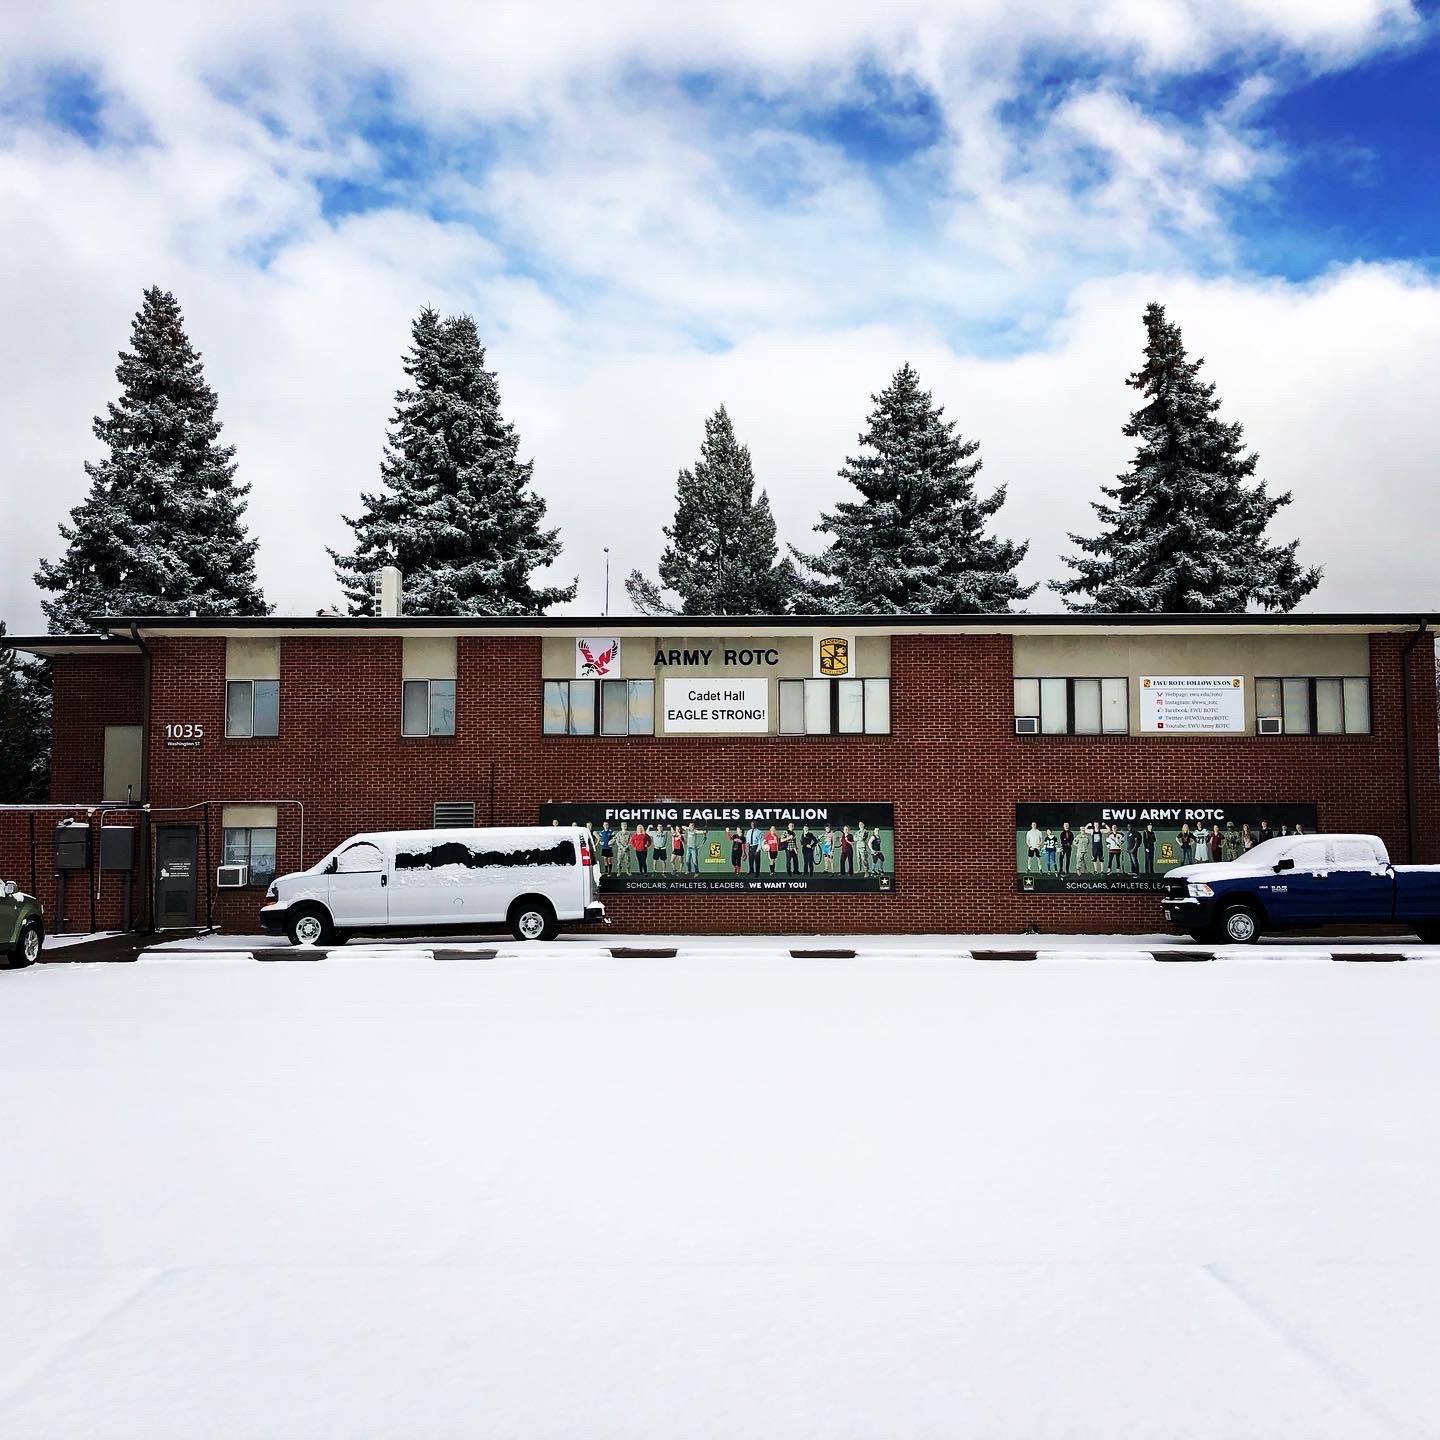 December 2019 Pictures from Eastern Washington University